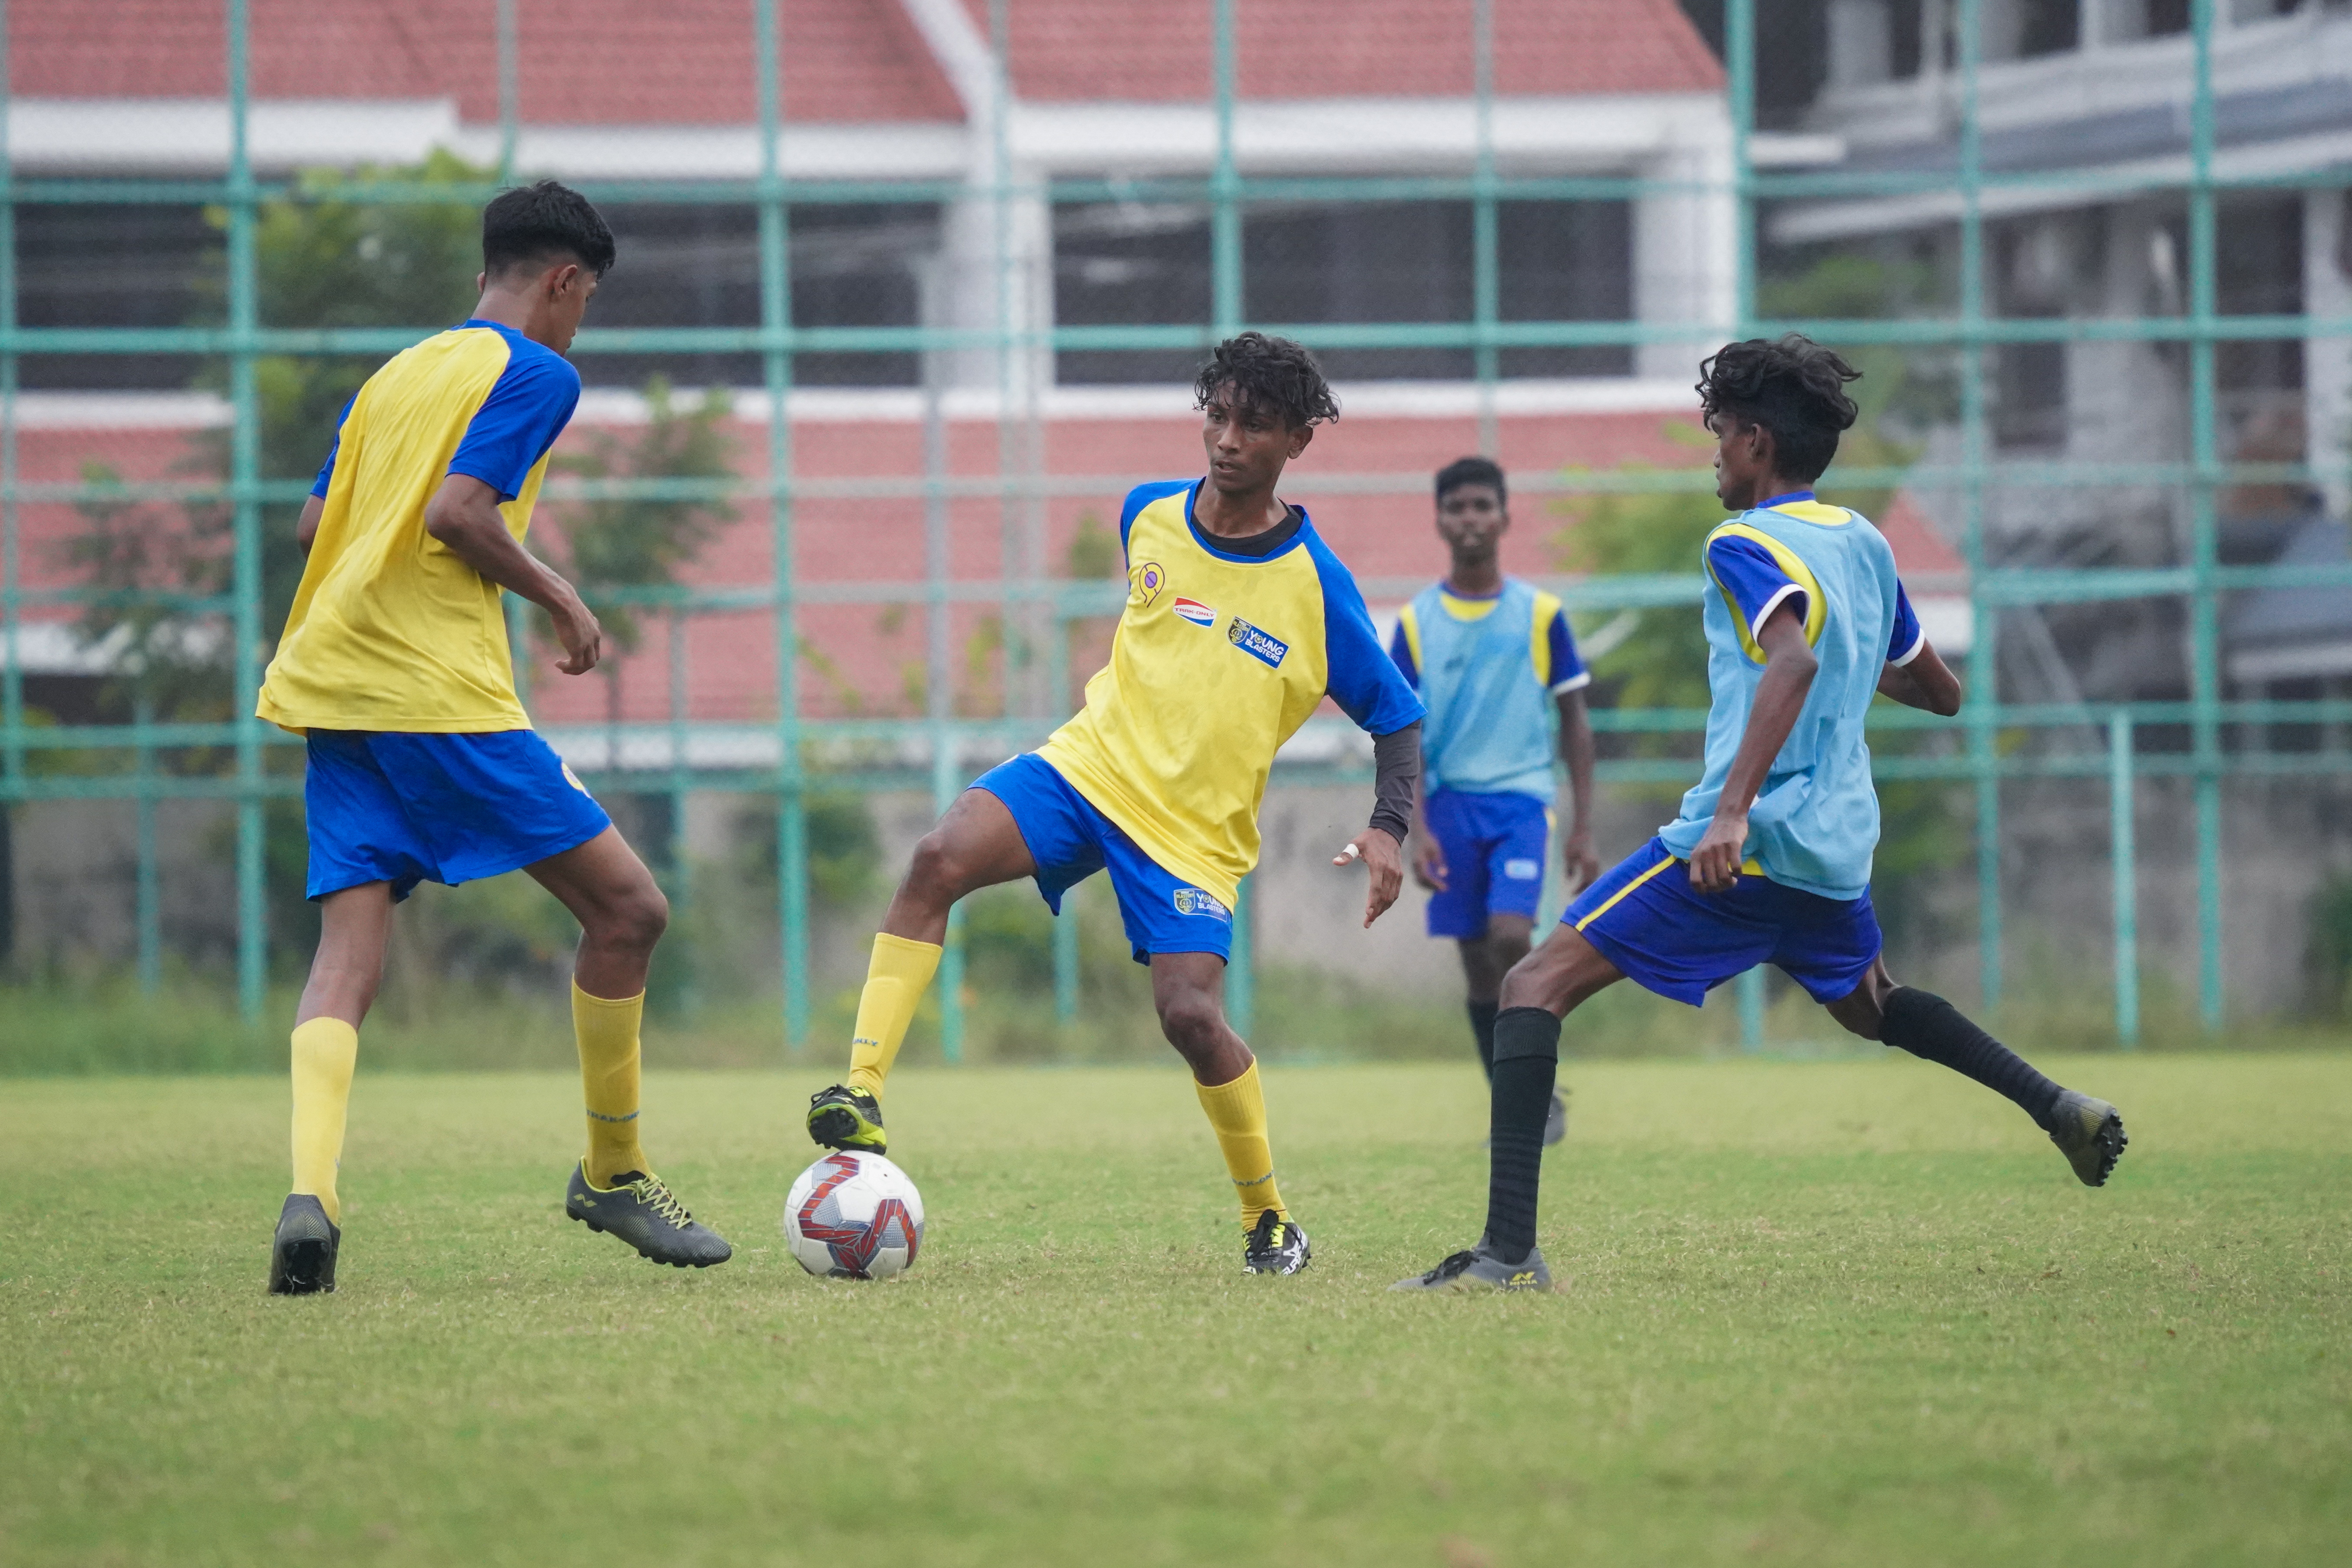 Young Blasters Sporthood Centre of Excellence